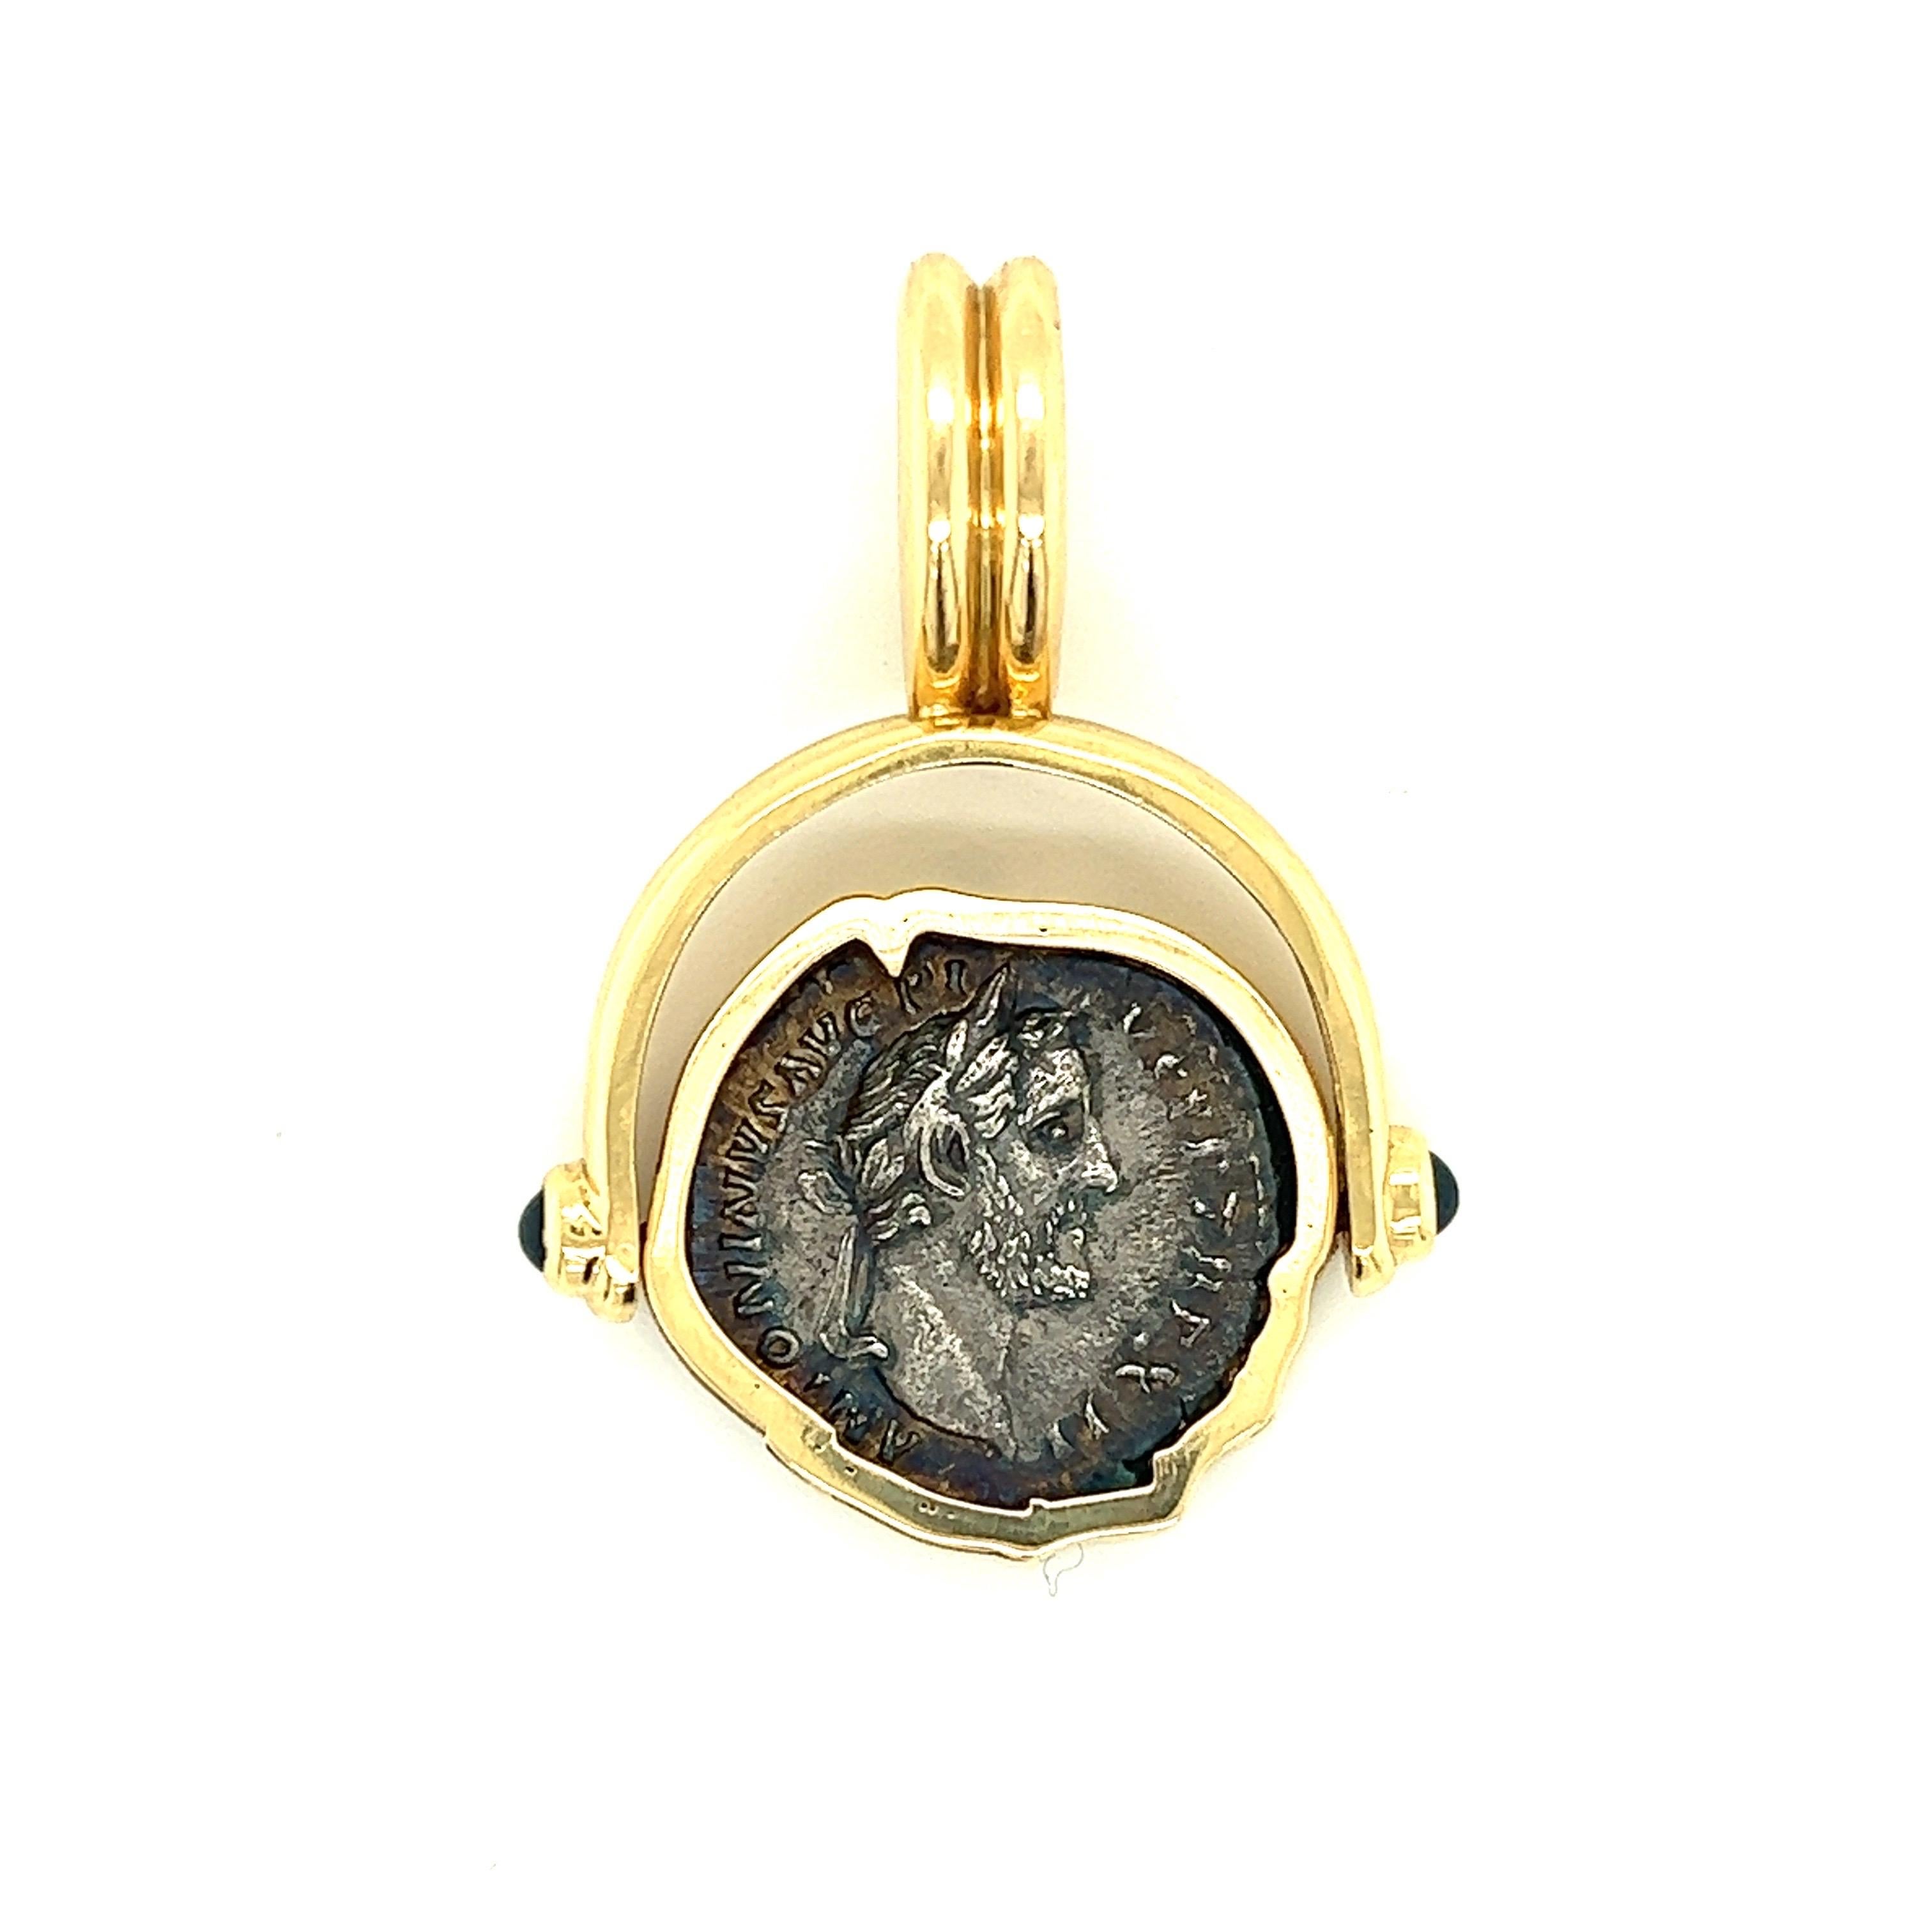 Introducing a captivating piece of history and luxury combined - a remarkable Silver Denarius Coin with an Antonius Pius flip pendant, elegantly presented in an 18k yellow gold bezel. This extraordinary artifact seamlessly merges the ancient world